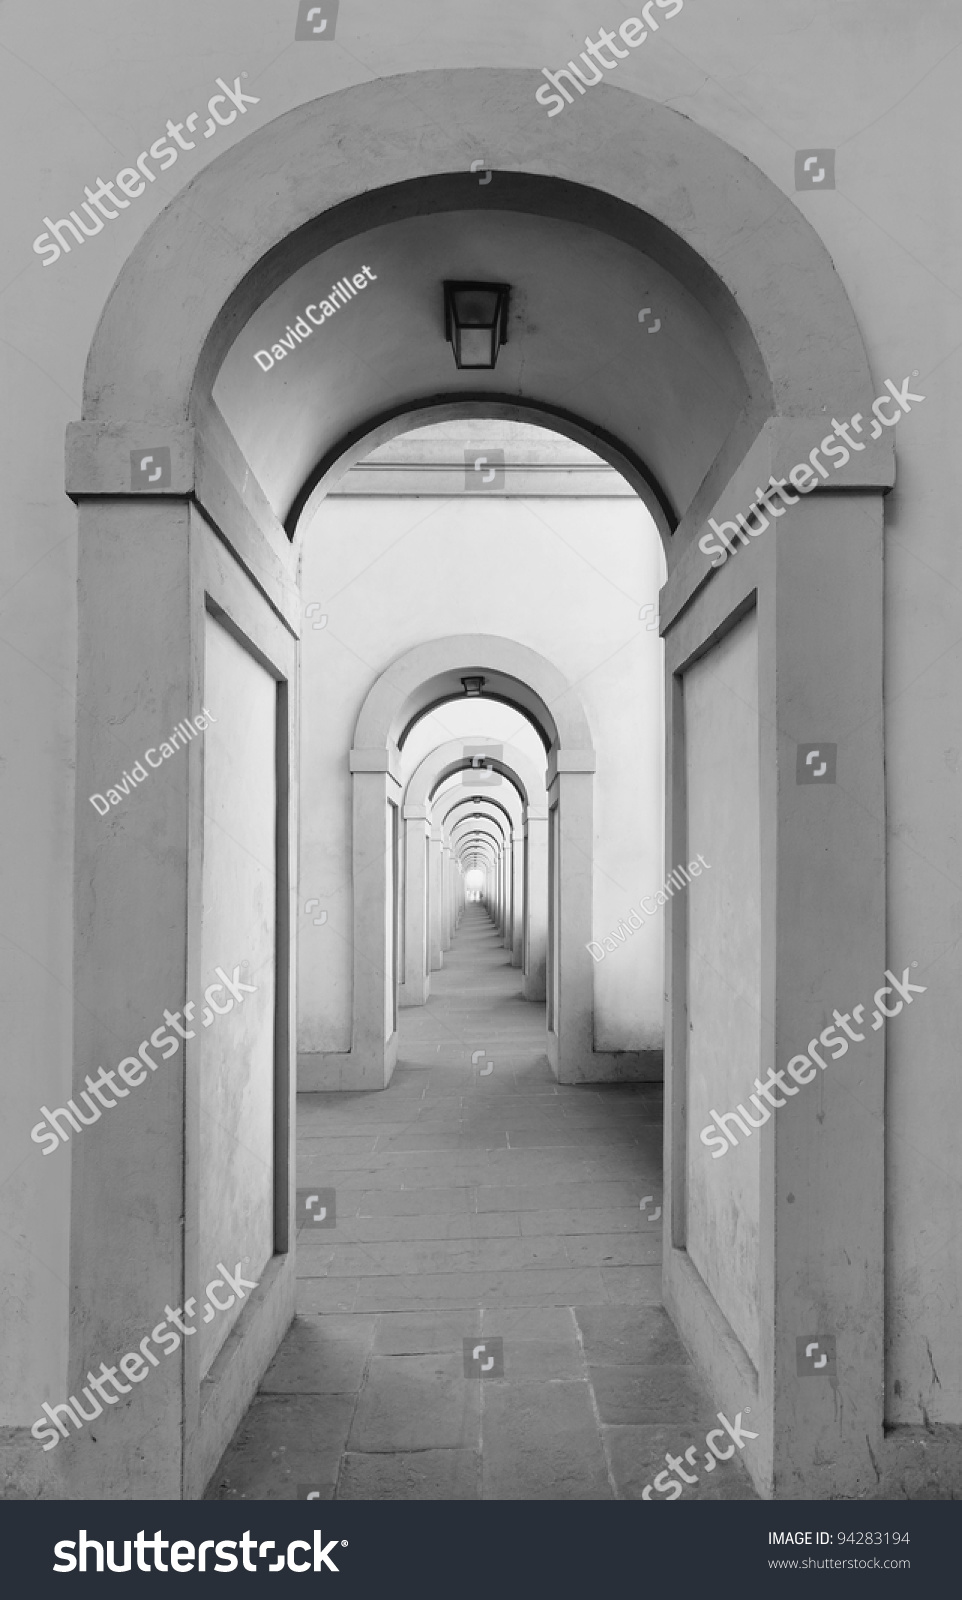 Endless Arched Doorways Repeating To Infinity. Stock Photo 94283194 ...